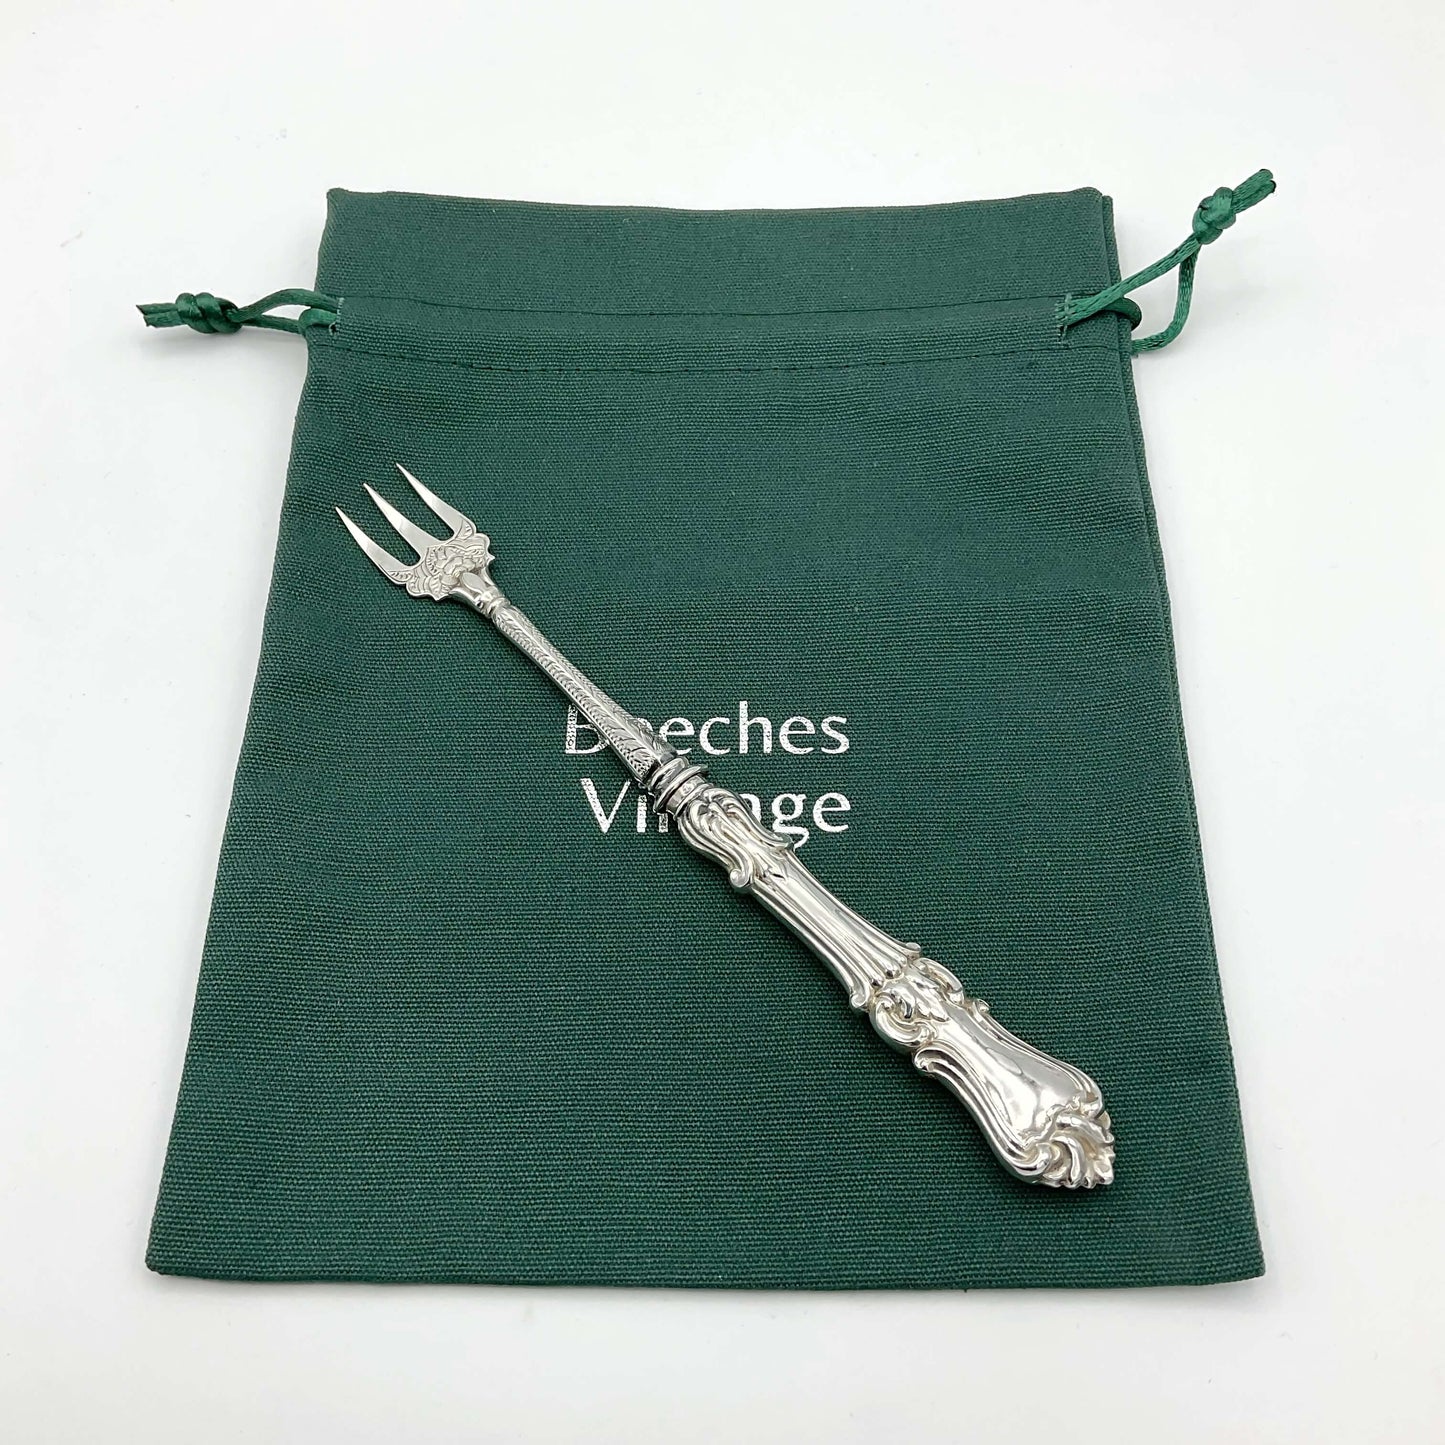 Antique silver plated pickle fork on green cotton gift bag